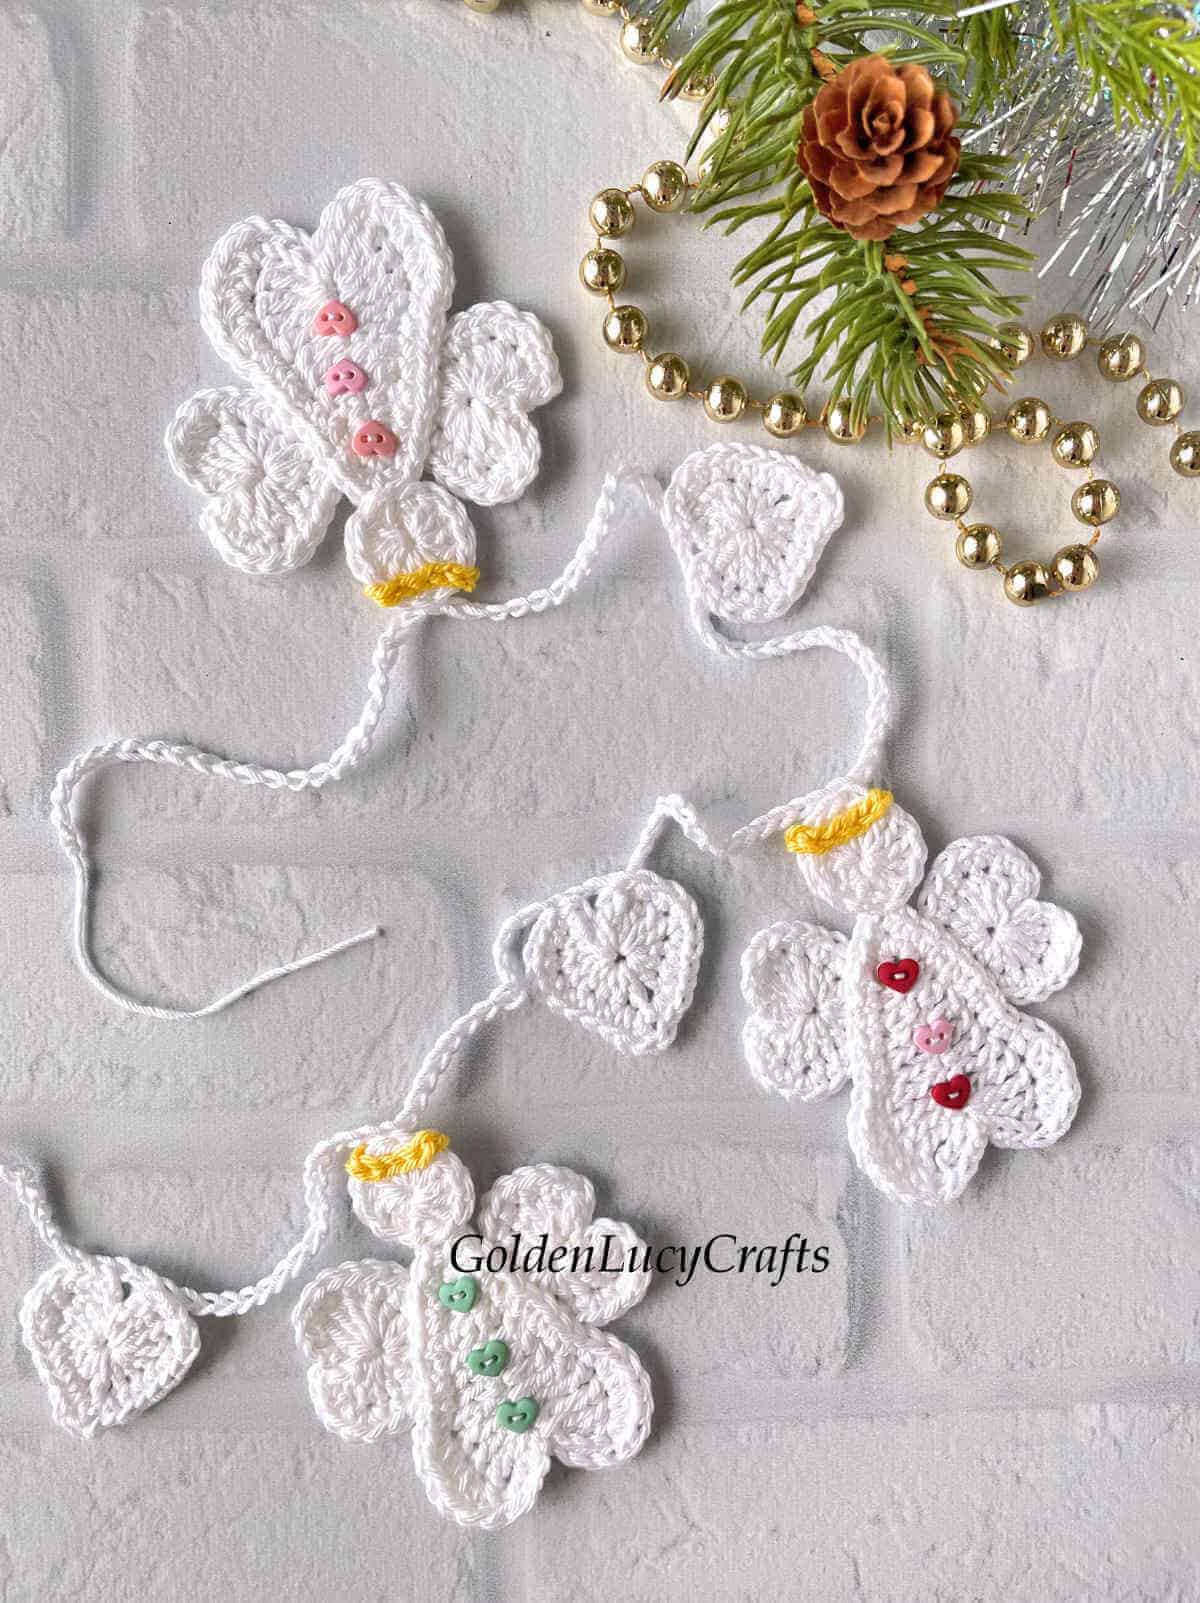 Crocheted angel garland close up picture.